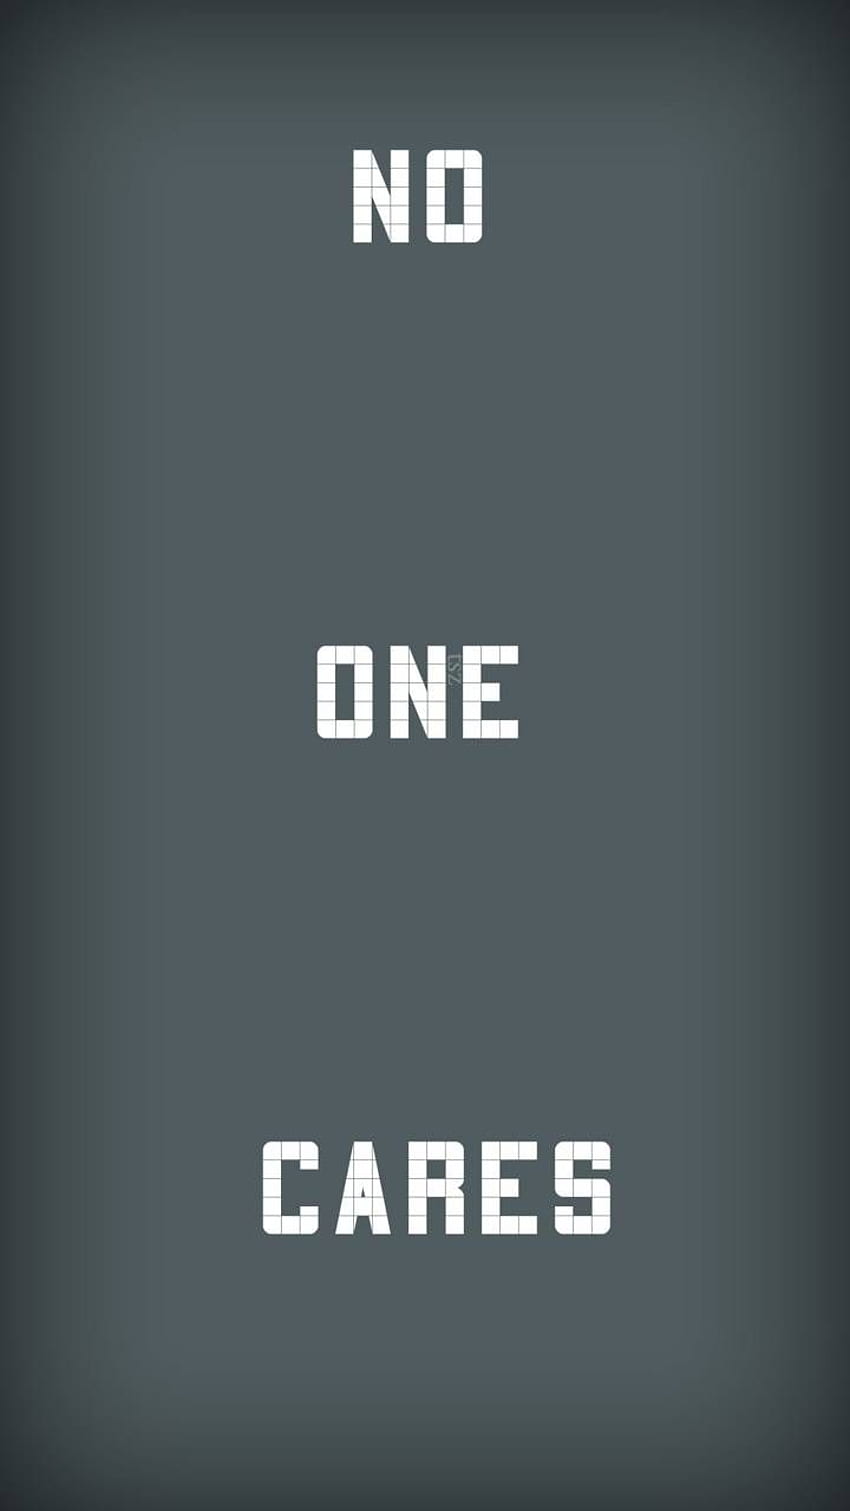 no one cares by alizubair0266 - 4e now. Browse millions of popular saying Wallpap. Action quotes, No one cares, Popular quotes HD phone wallpaper